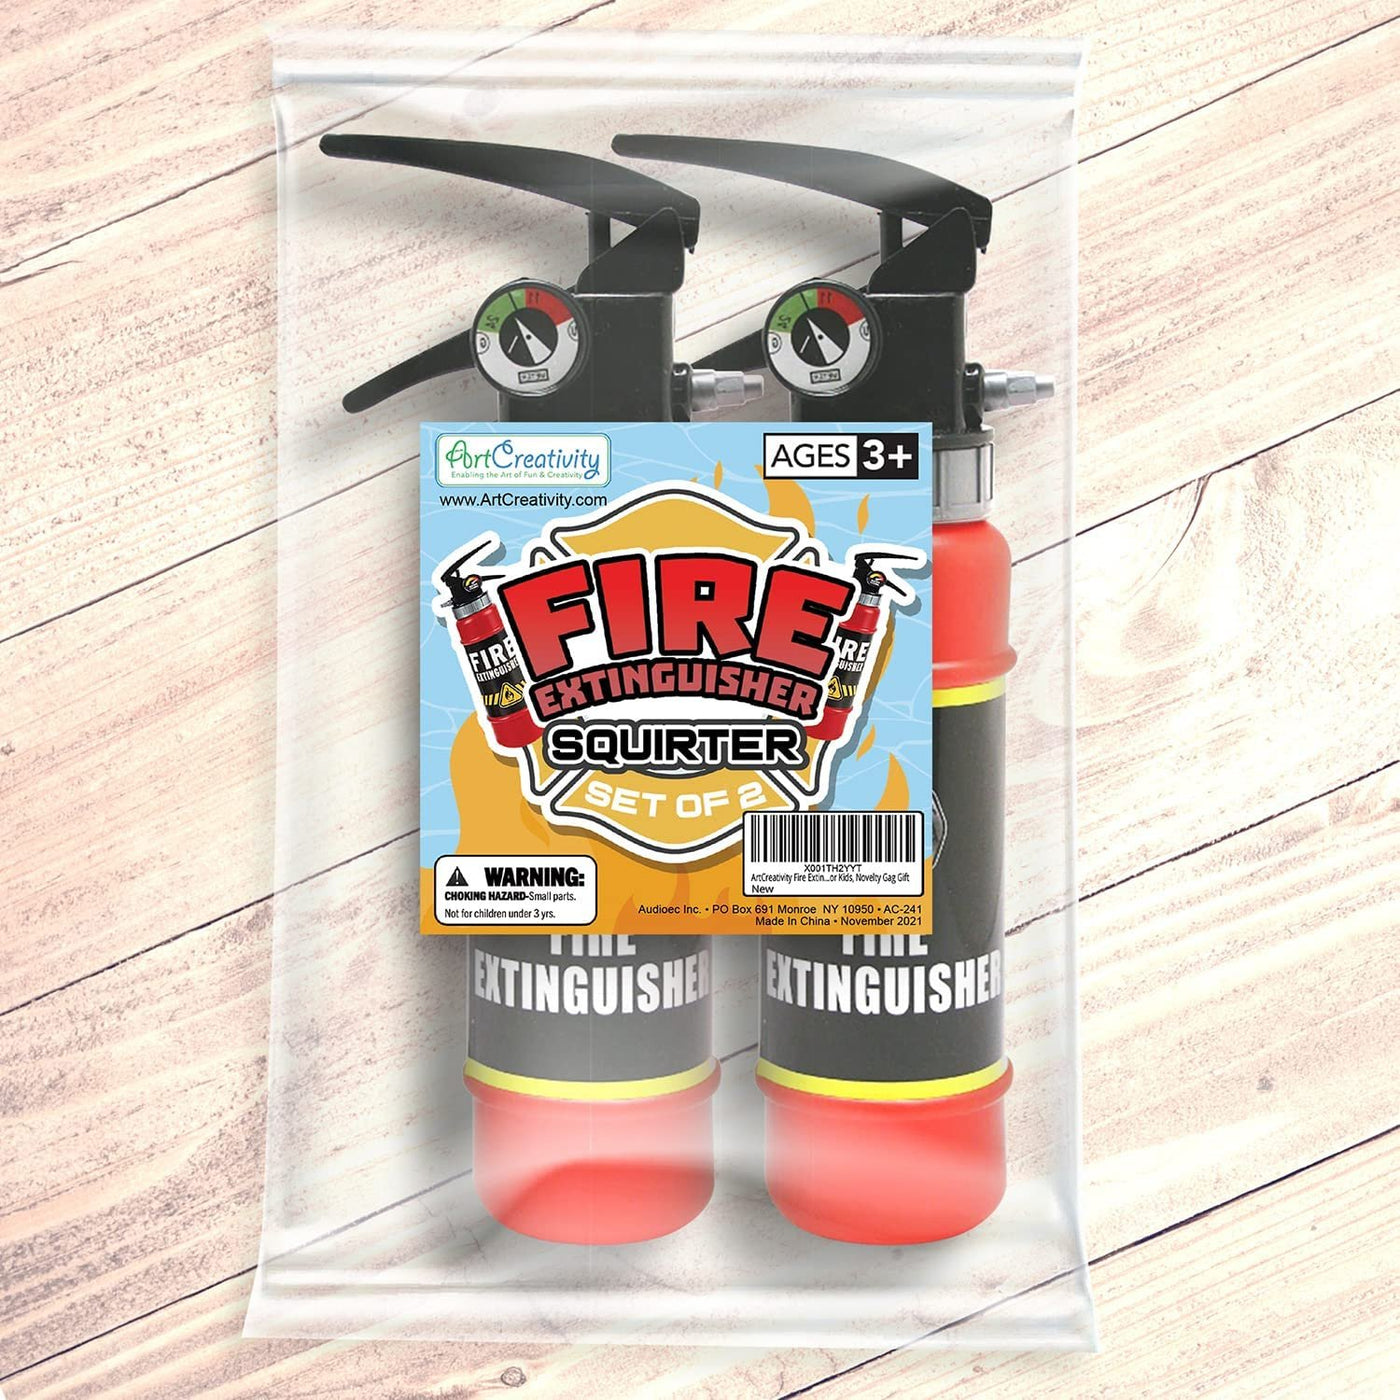 ArtCreativity Fire Extinguisher Squirter Toy - Pack of 2 - 9 Inch Water Extinguisher with Realistic Design - Fun Outdoor Summer Toy for Boys and Girls - Great Fireman Toy for Kids, Novelty Gag Gift